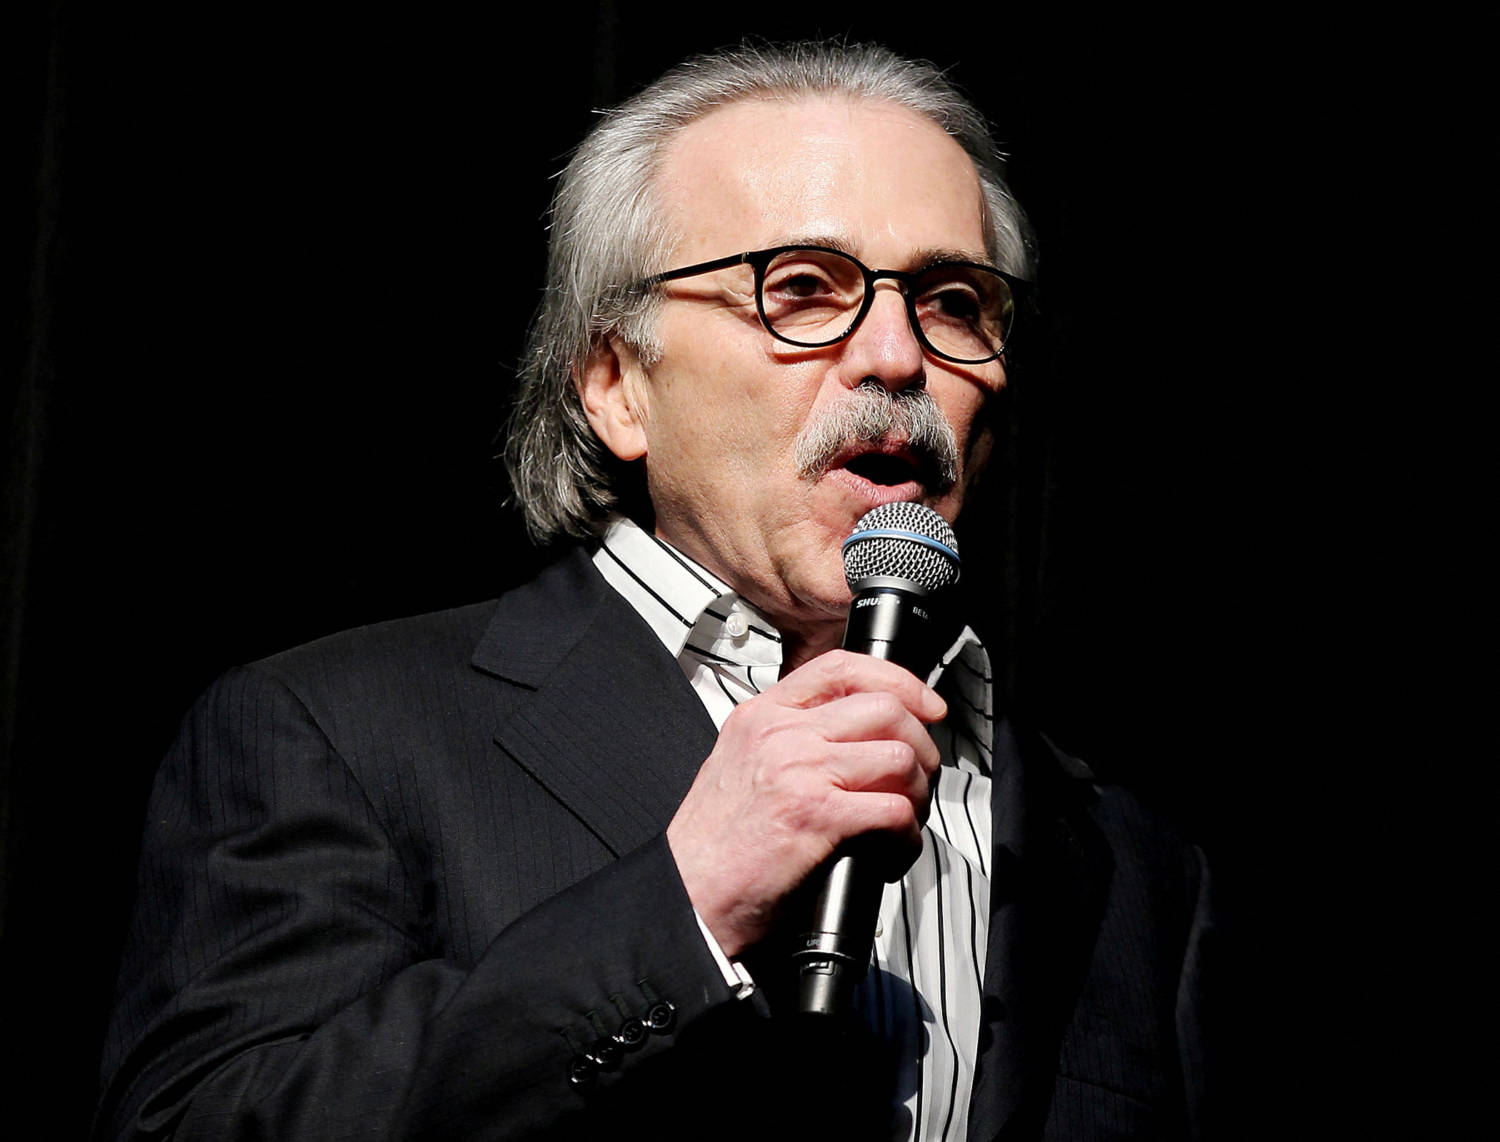 File Photo: David Pecker, Chair And Ceo Of American Media, Speaks At The Shape And Men's Fitness Super Bowl Party In New York